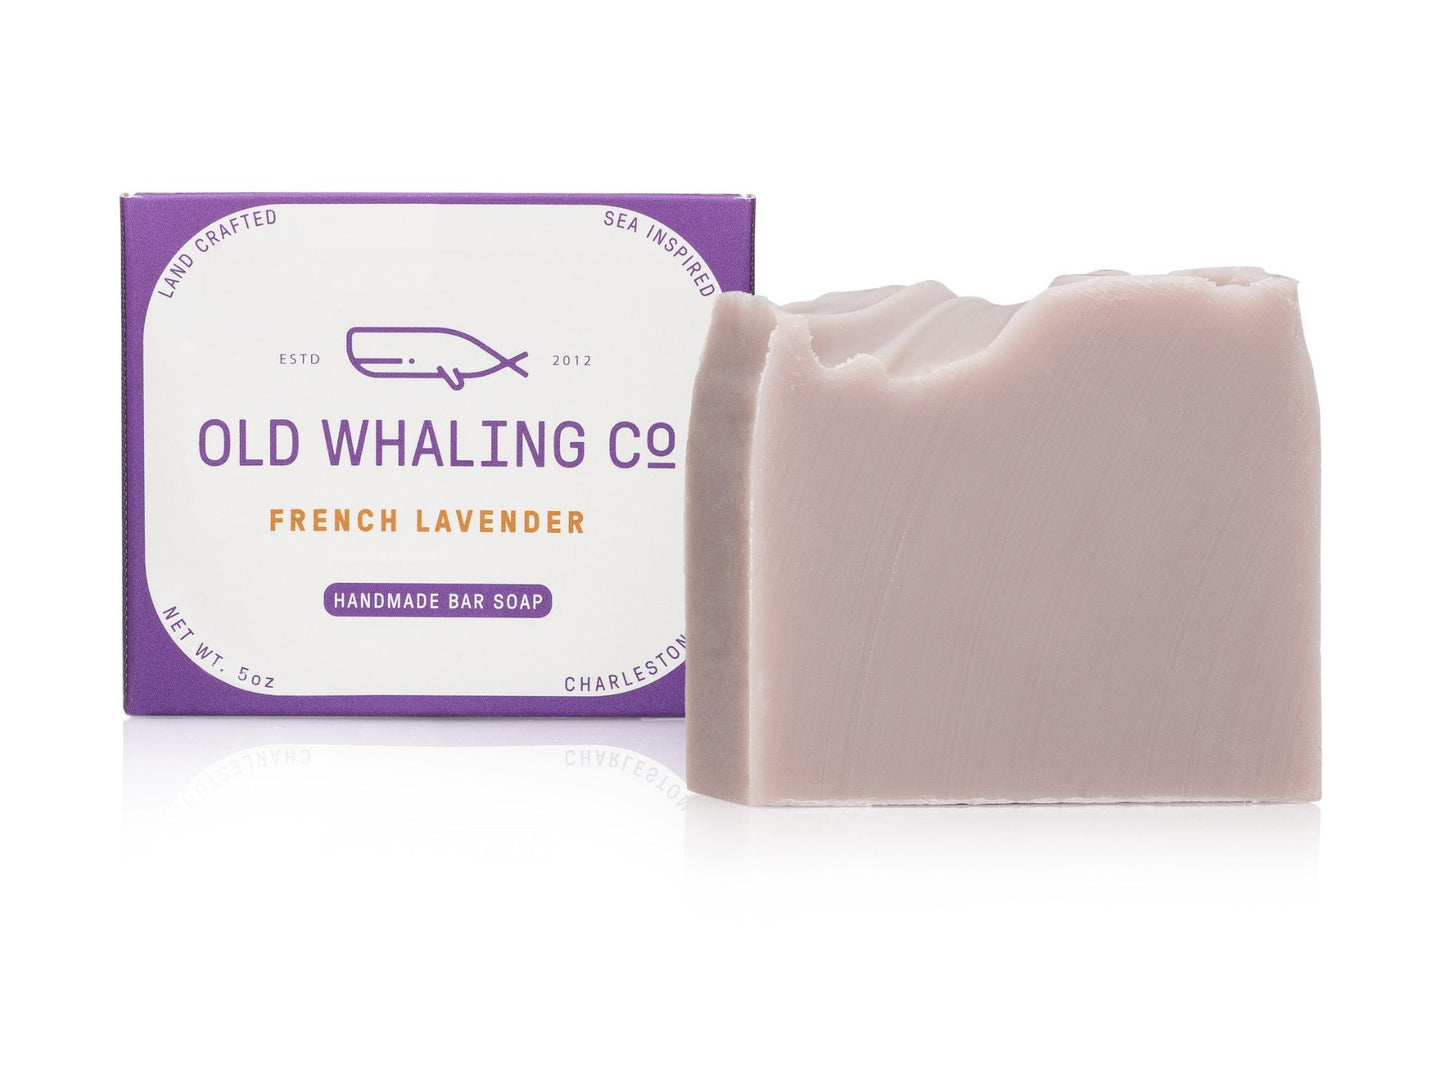 Old Whaling Co French Lavender Bar